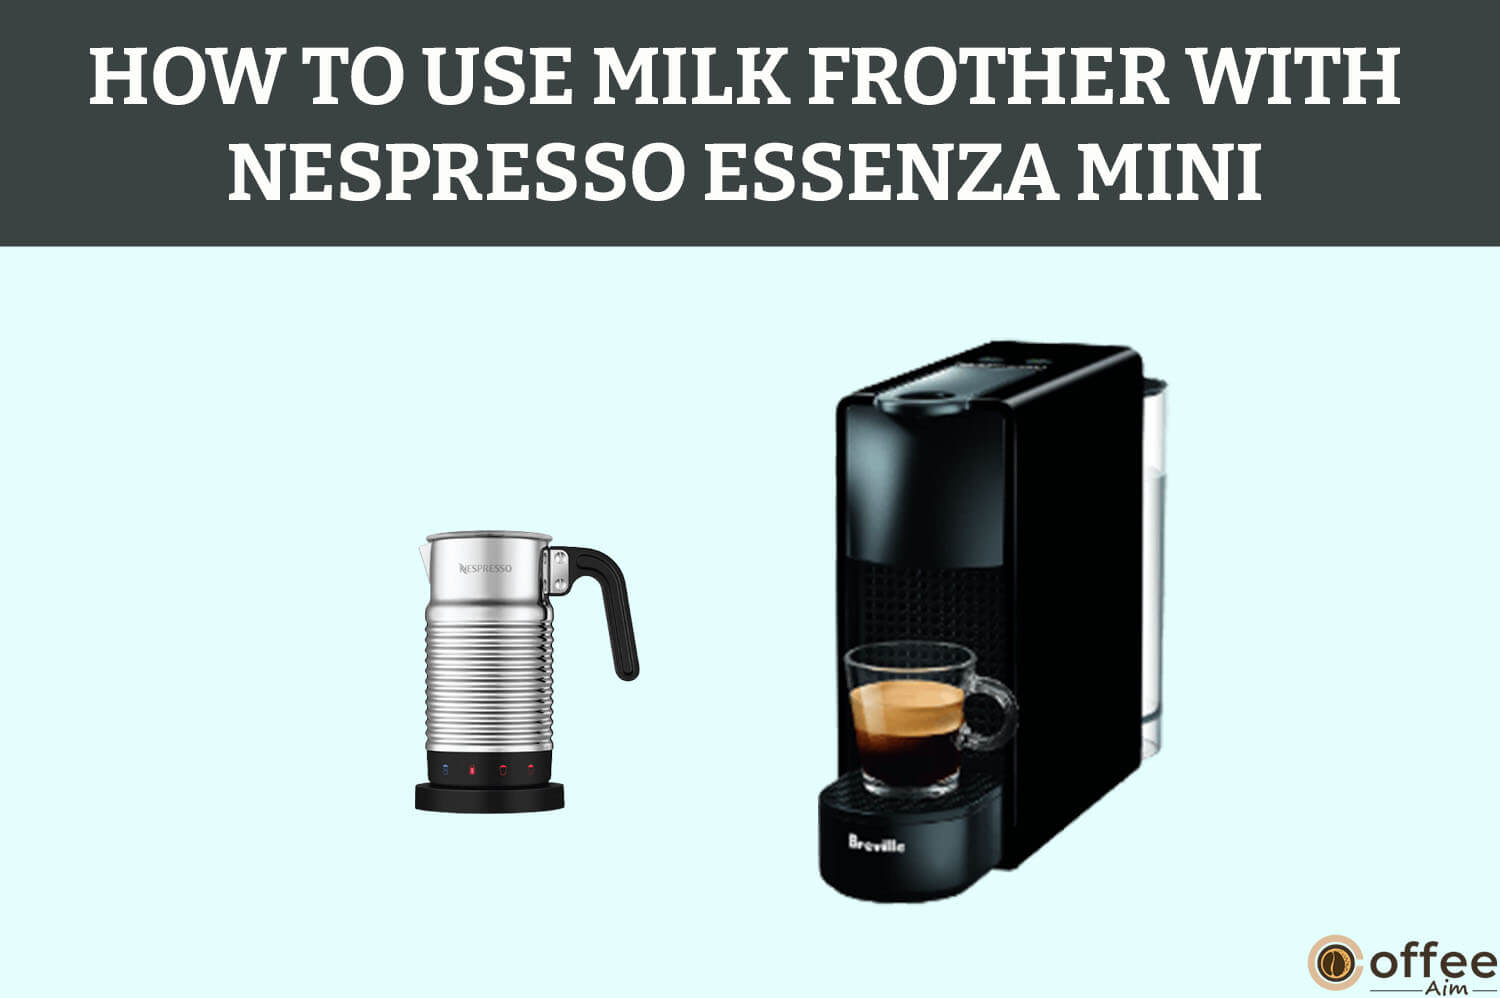 Featured image for the article "How To Use Milk Frother With Nespresso Essenza Mini"